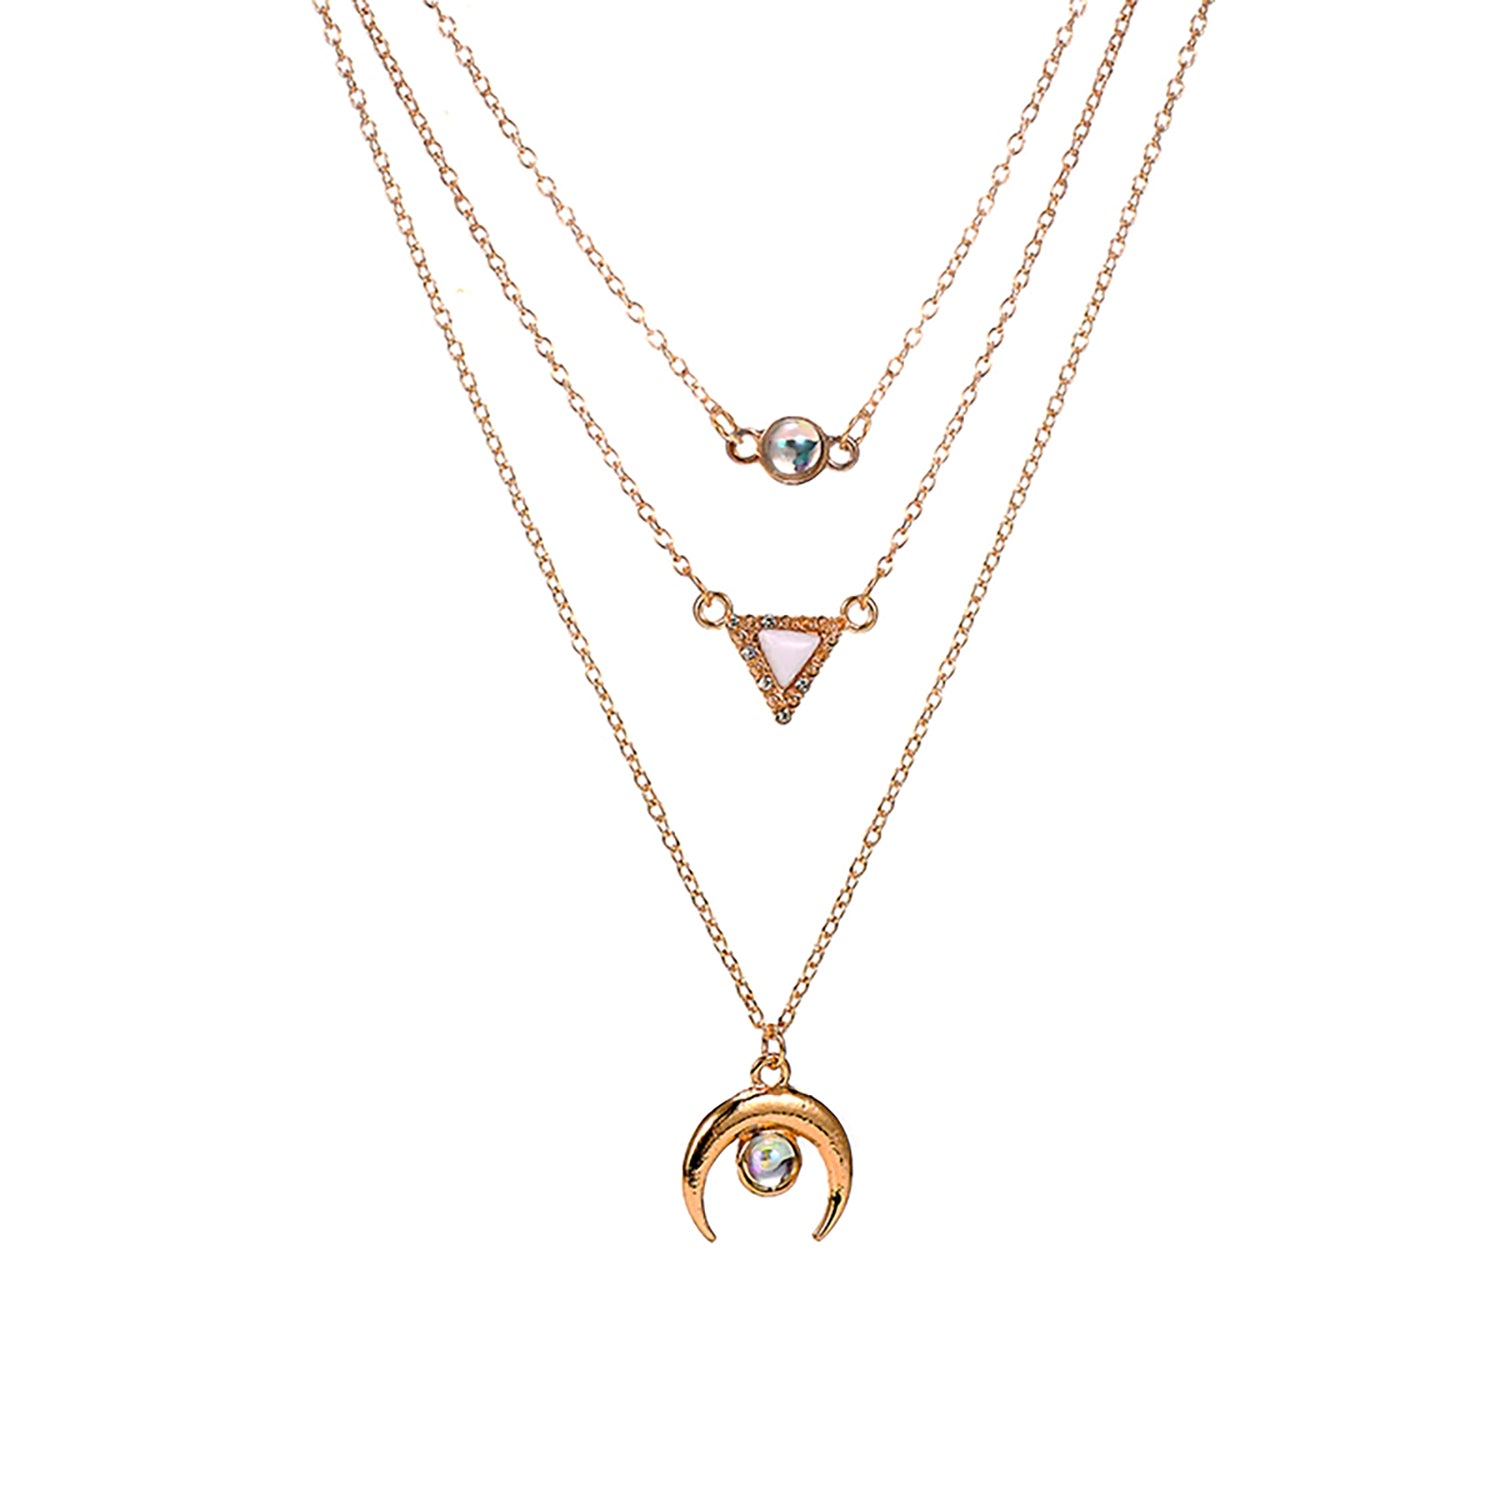 Cute Rose Gold Necklace - Moon Charm Necklace - Layered Necklace